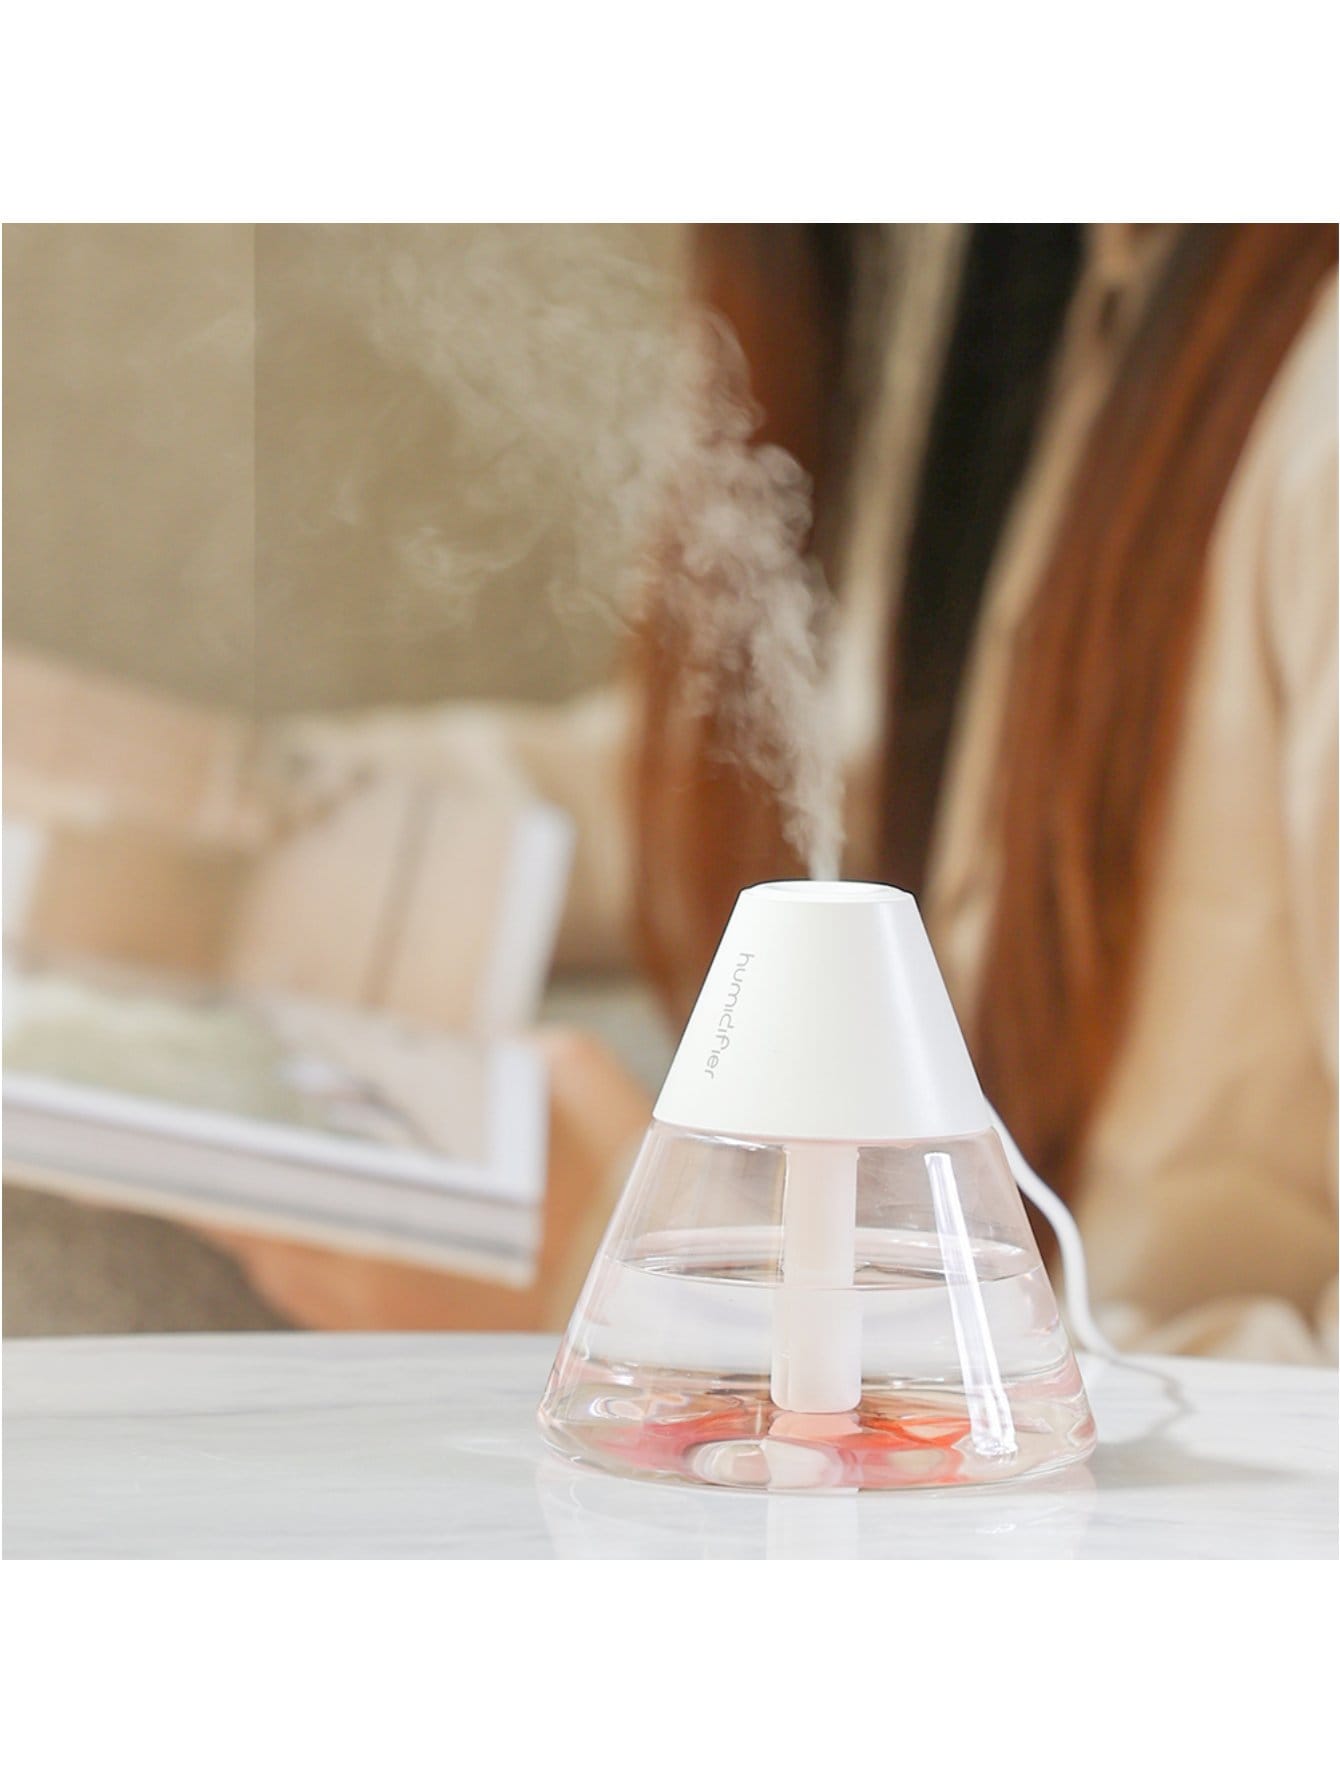 1pc Mini Volcano Shaped Humidifier With Auto Power Off And Dual Spray Modes, Suitable For Bedroom, Living Room And Office Desktop-Black-4